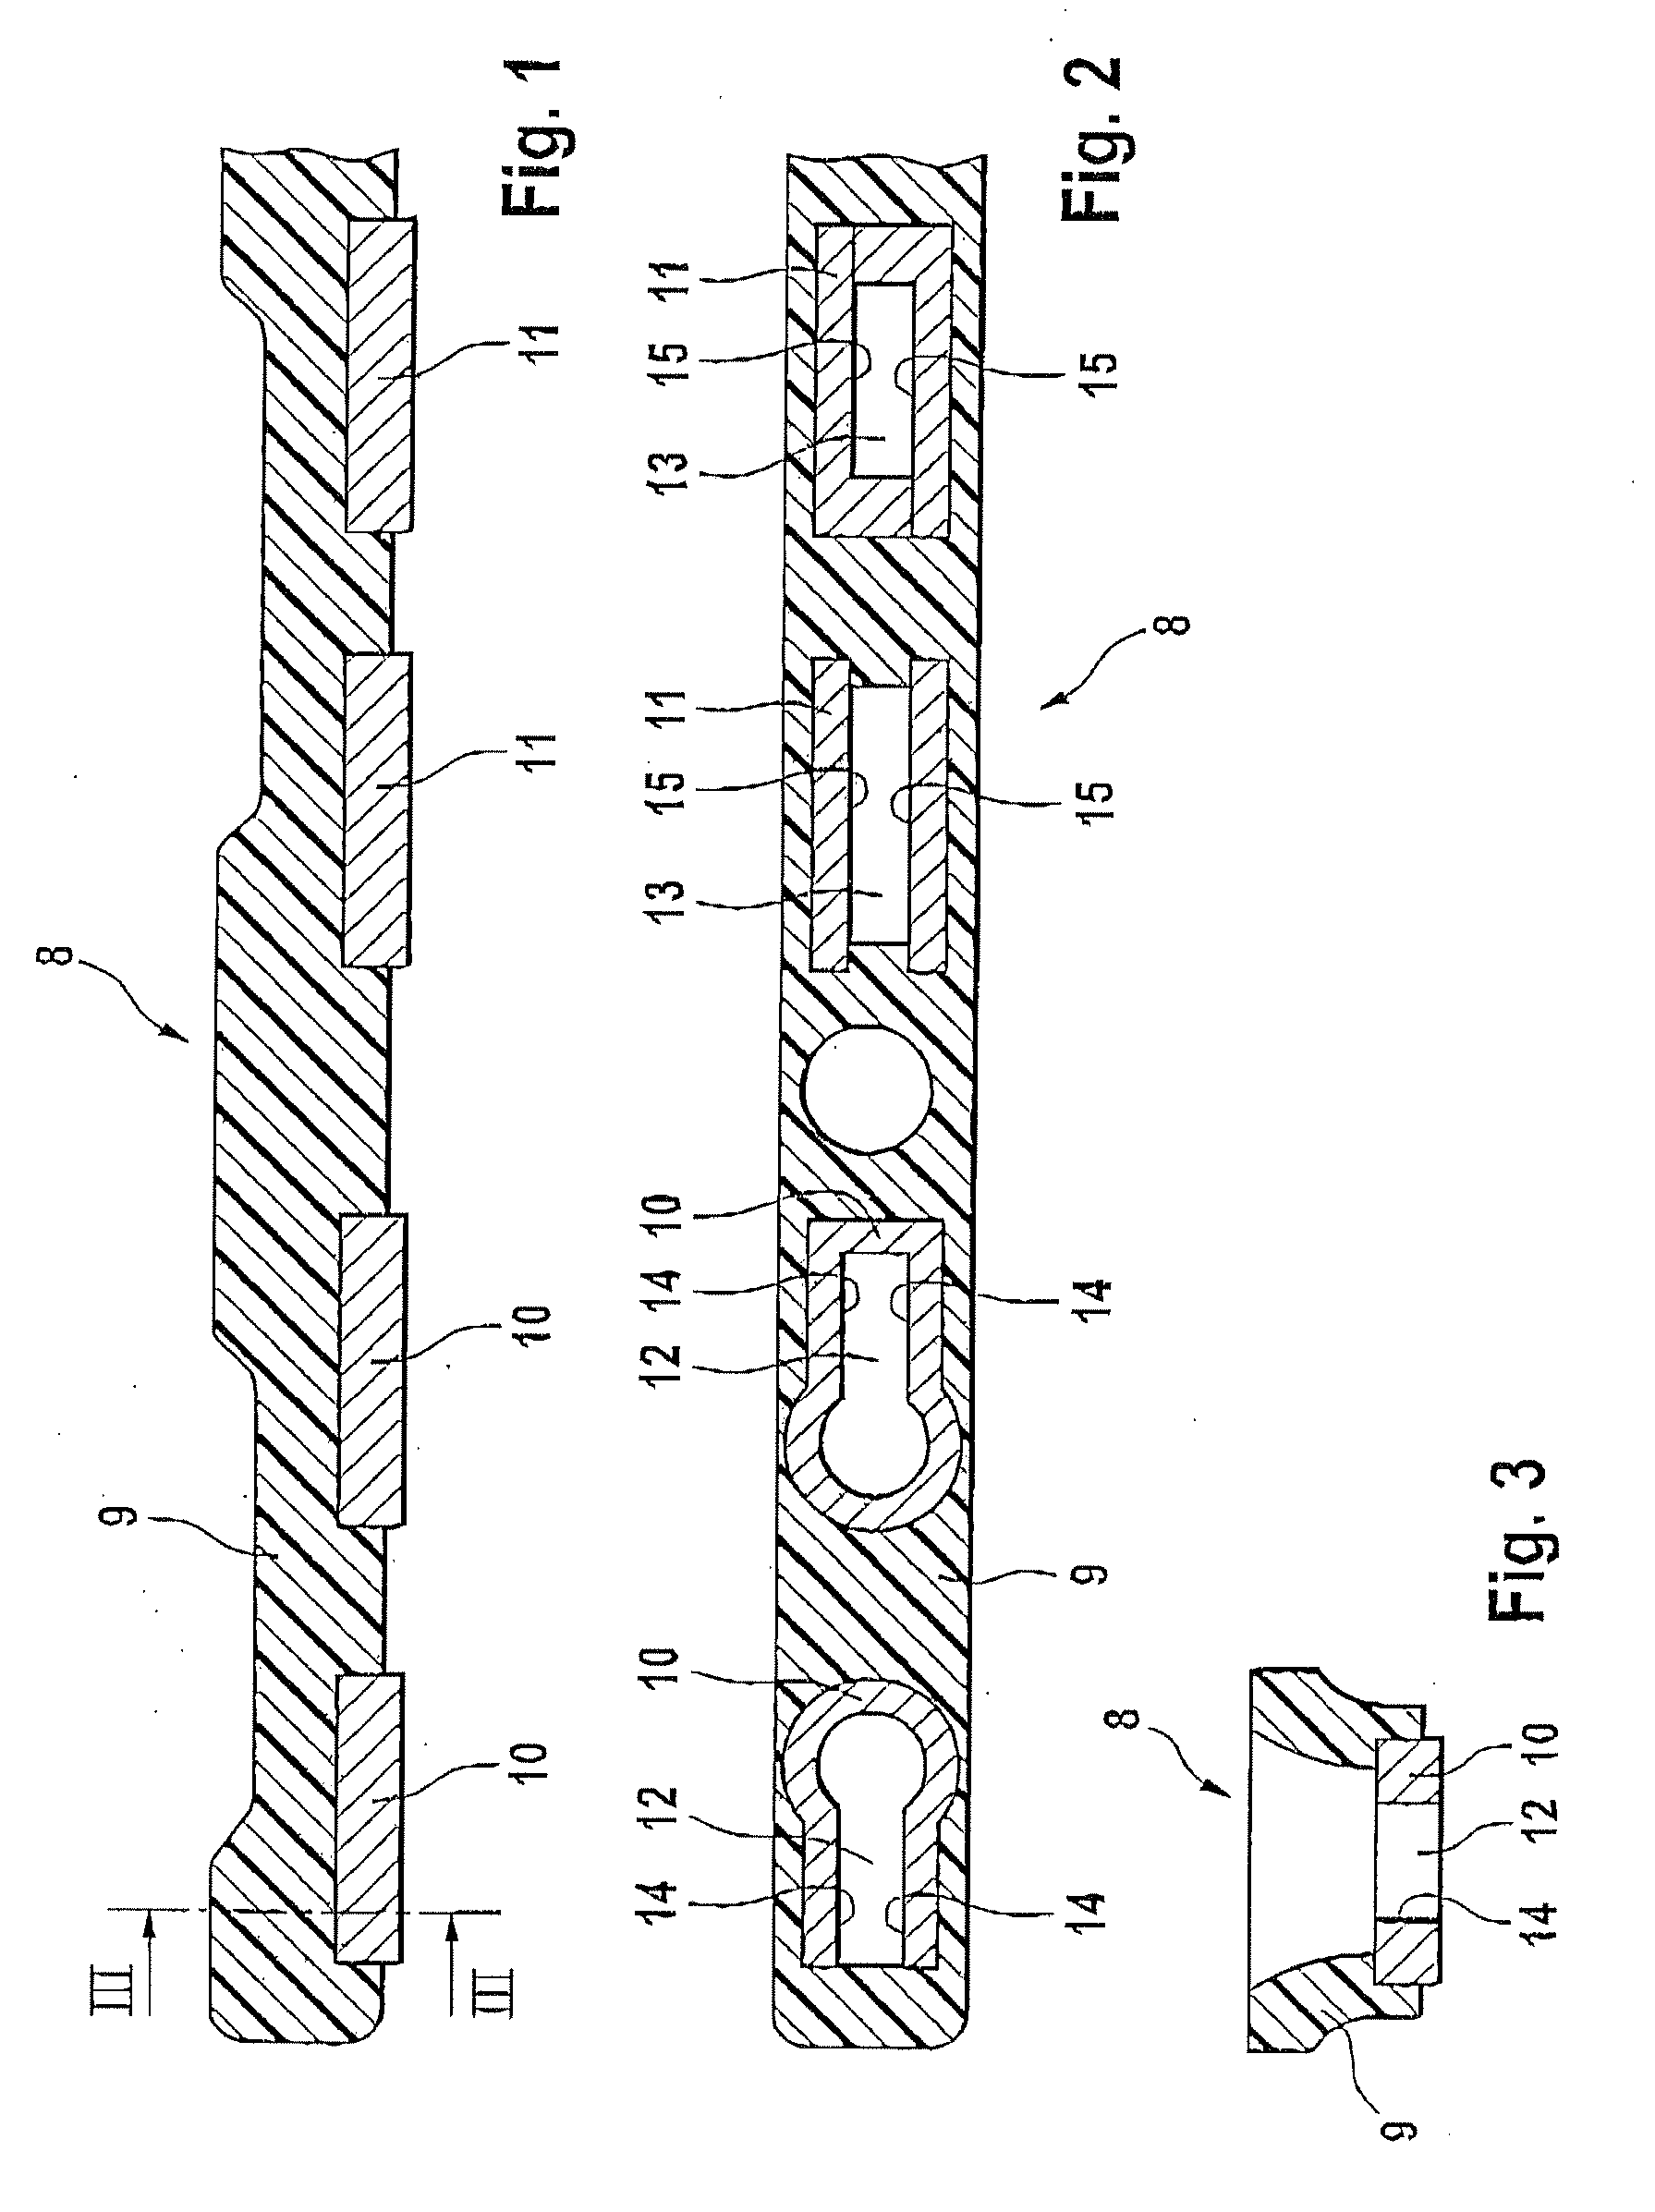 Guide gib for the valve operating mechanism of an internal combustion engine